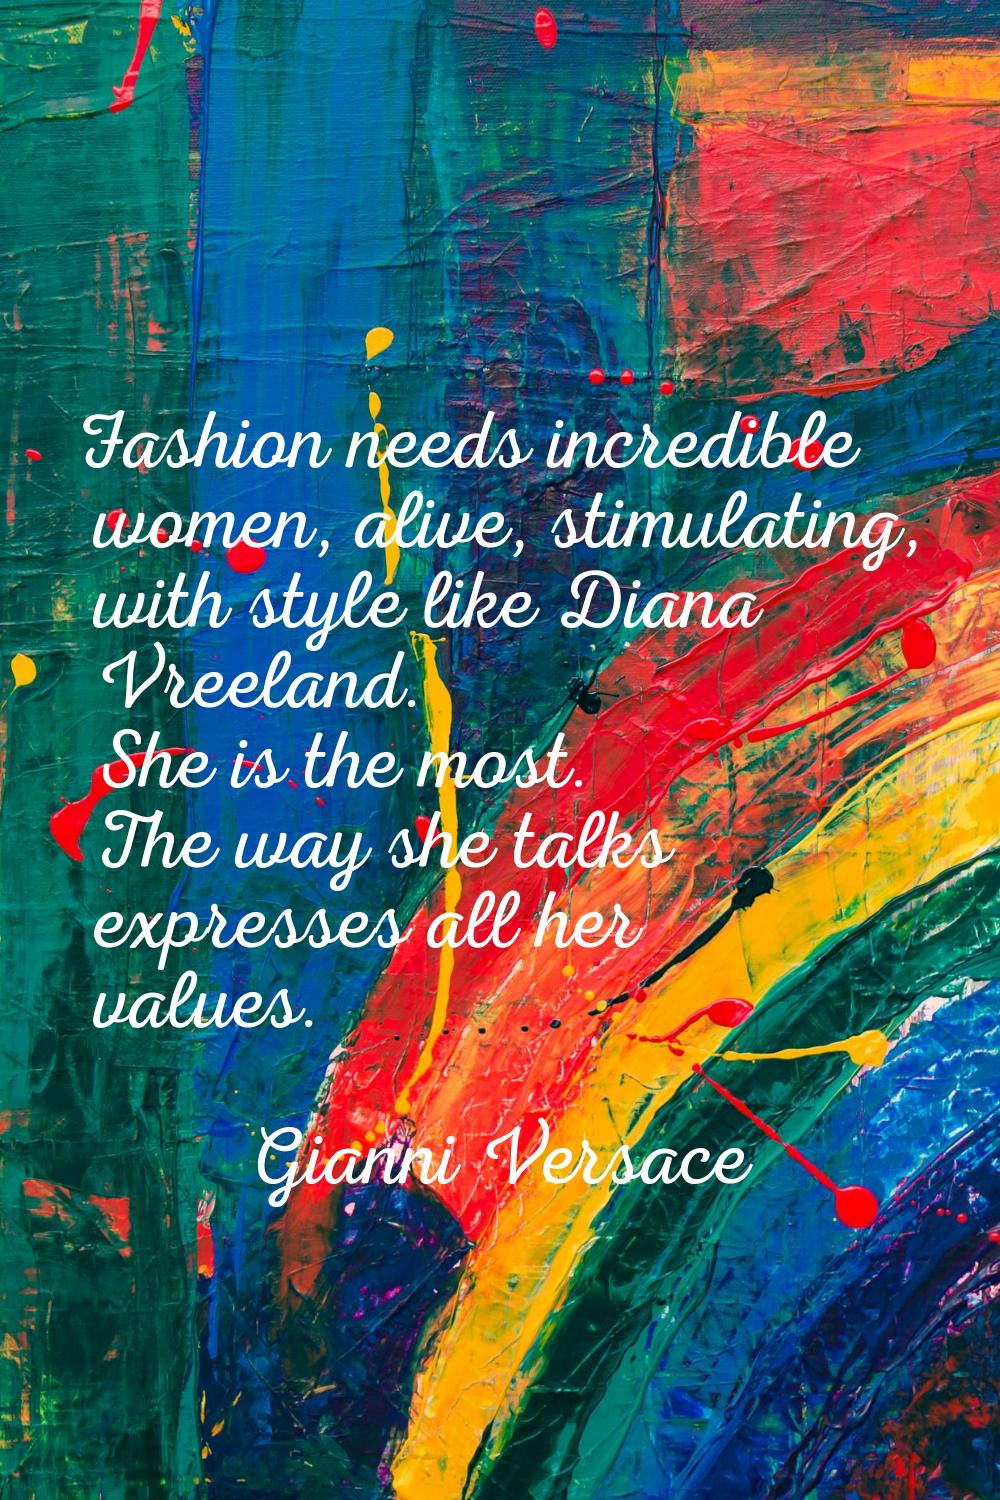 Fashion needs incredible women, alive, stimulating, with style like Diana Vreeland. She is the most